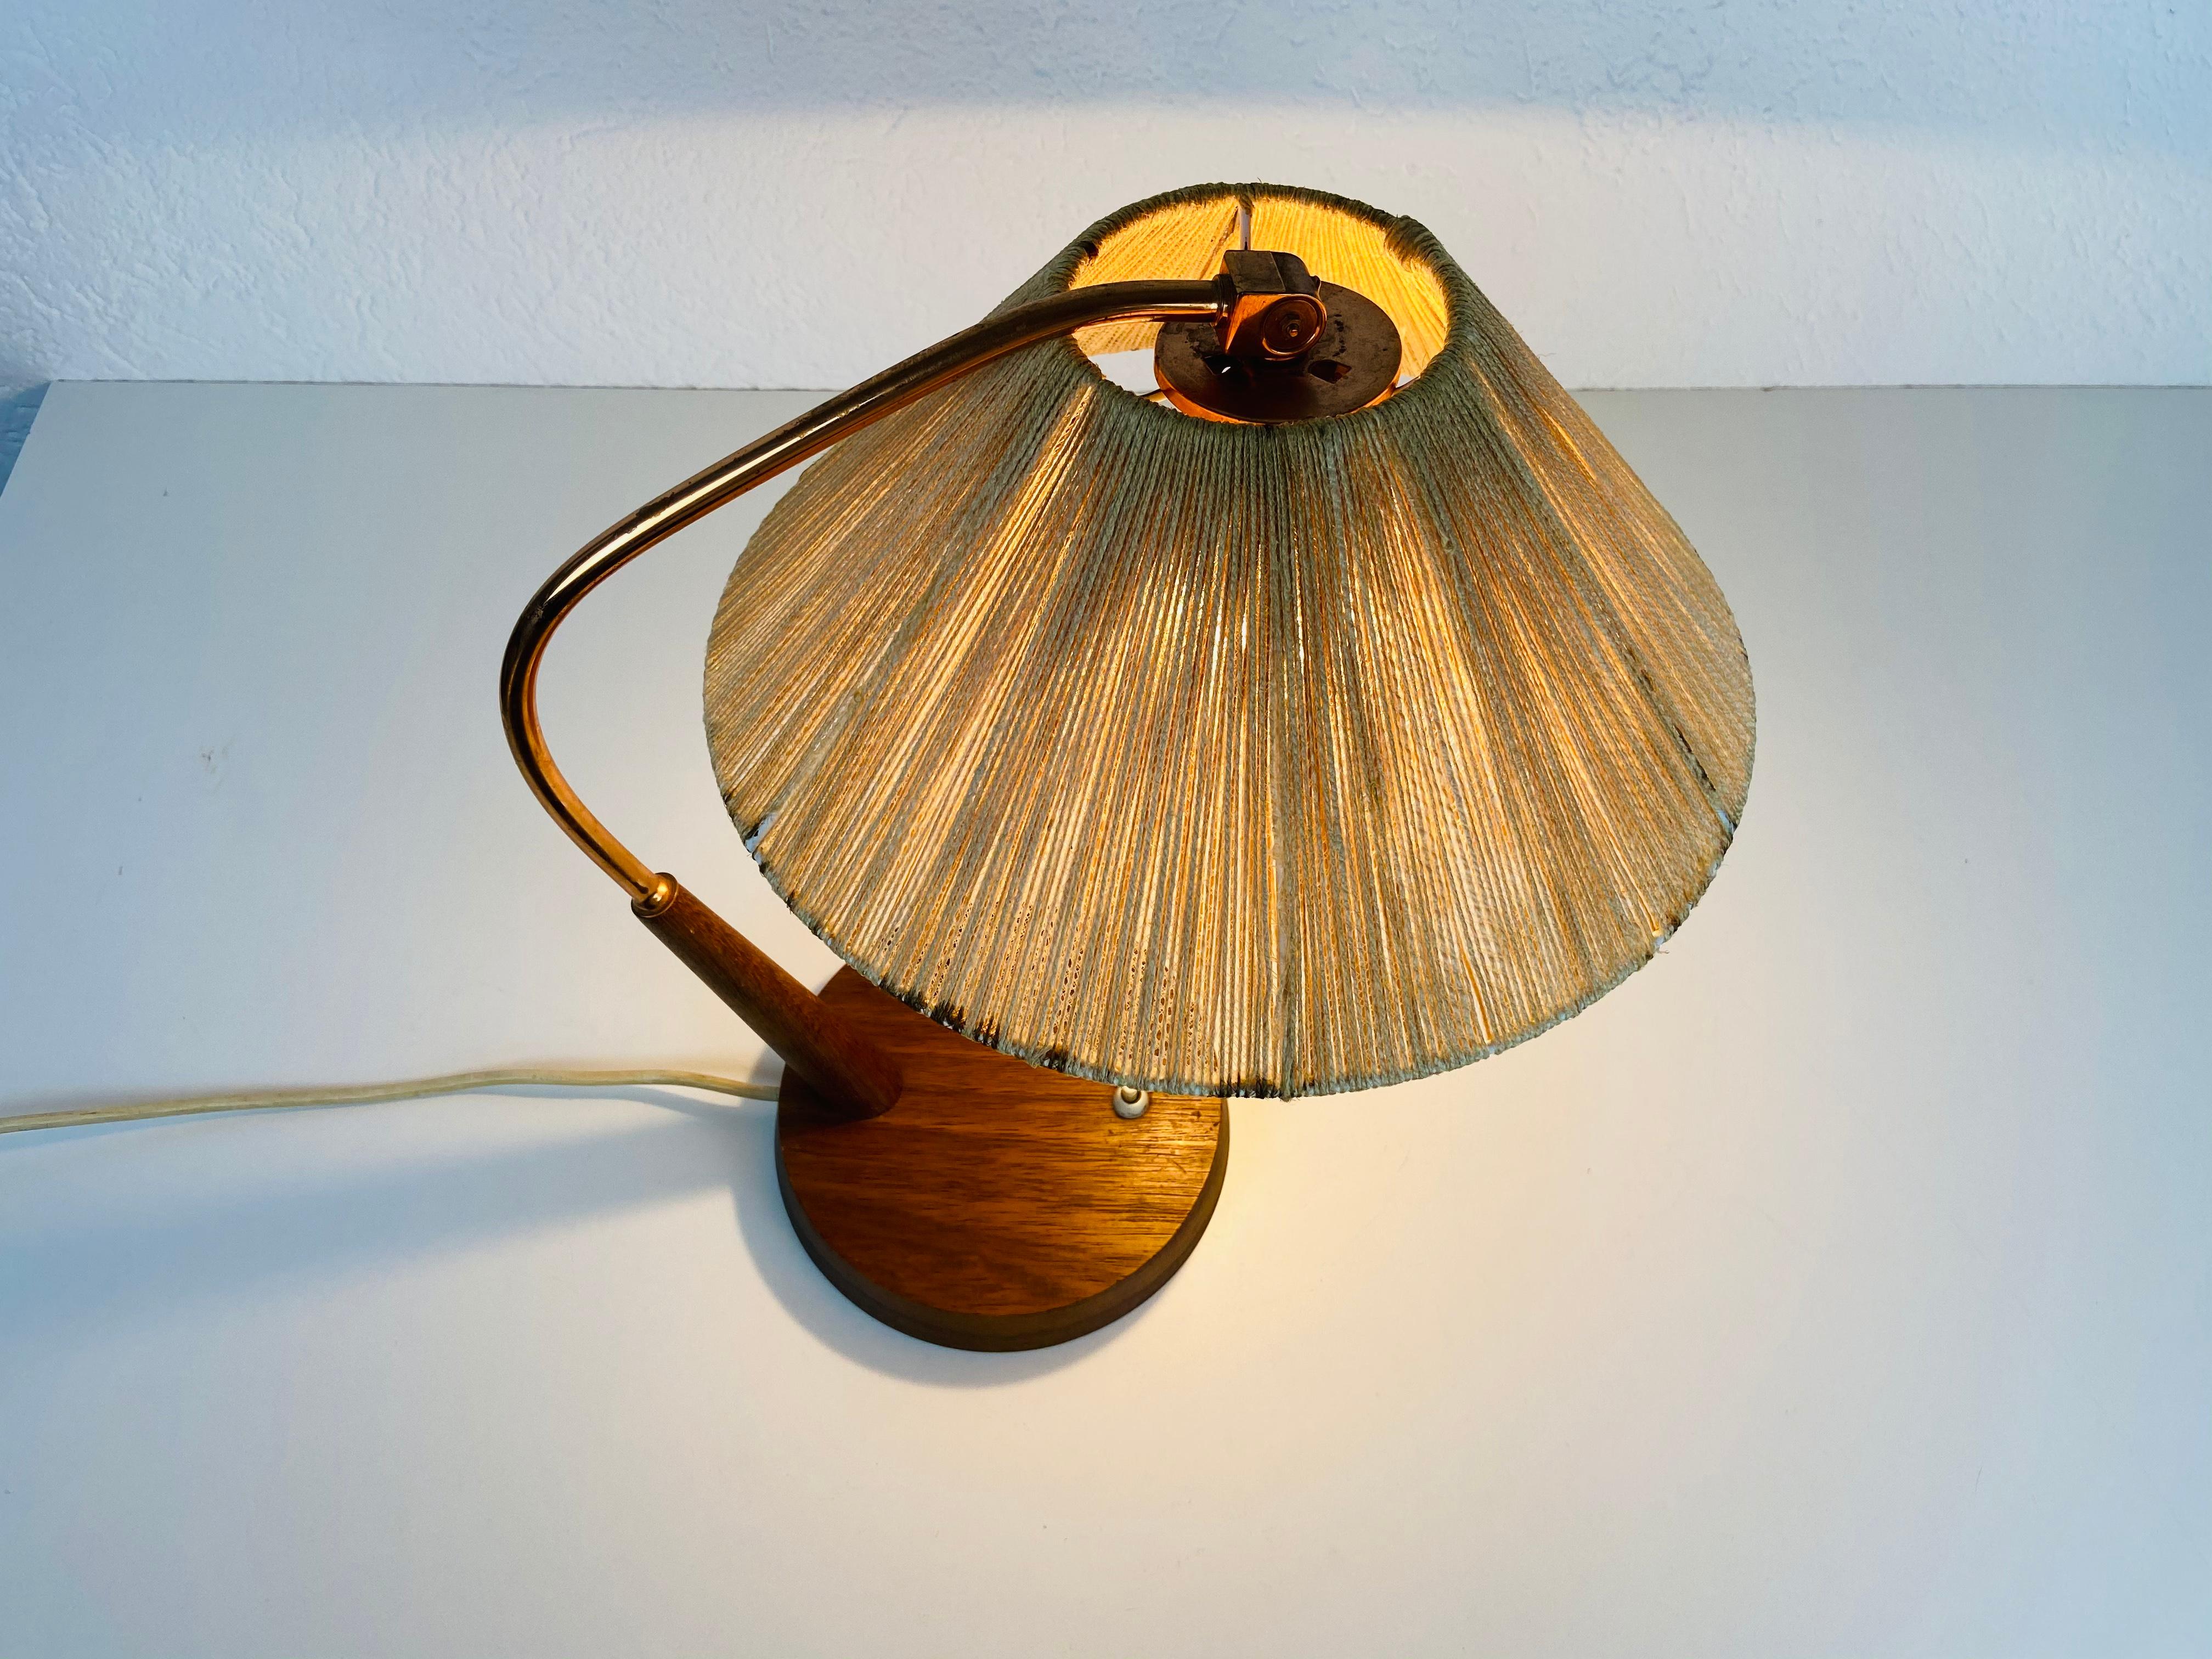 Midcentury Teak and Rattan Table Lamp by Temde, circa 1970 For Sale 5